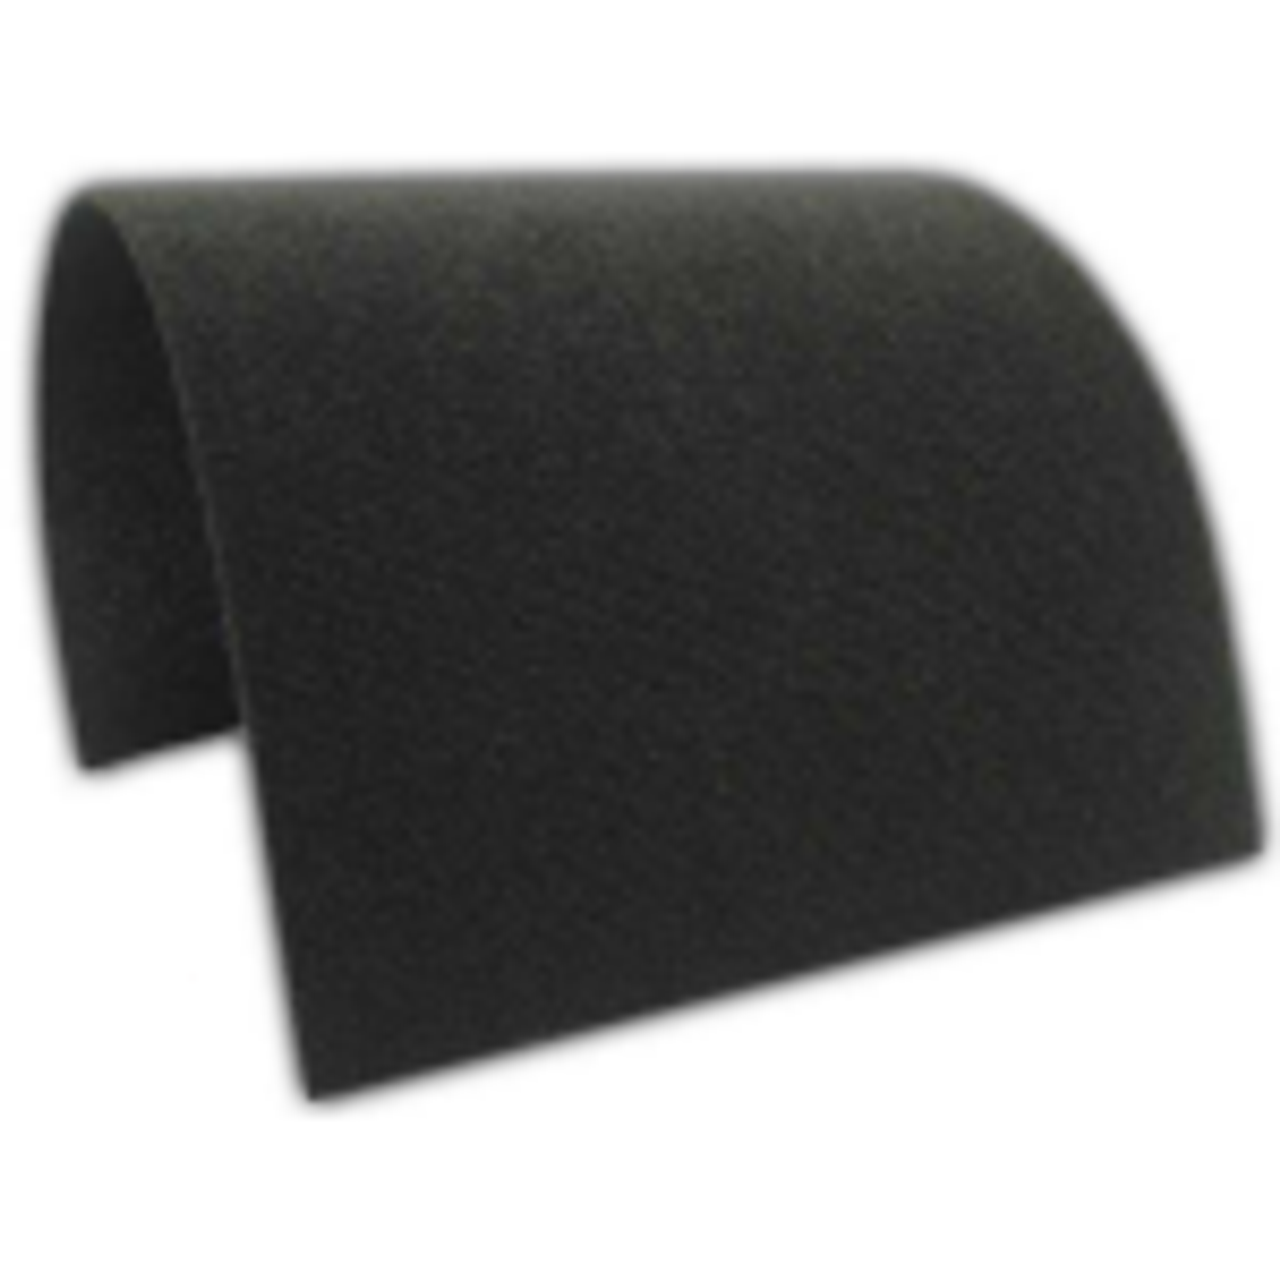 velcro fabric sheets, velcro fabric sheets Suppliers and